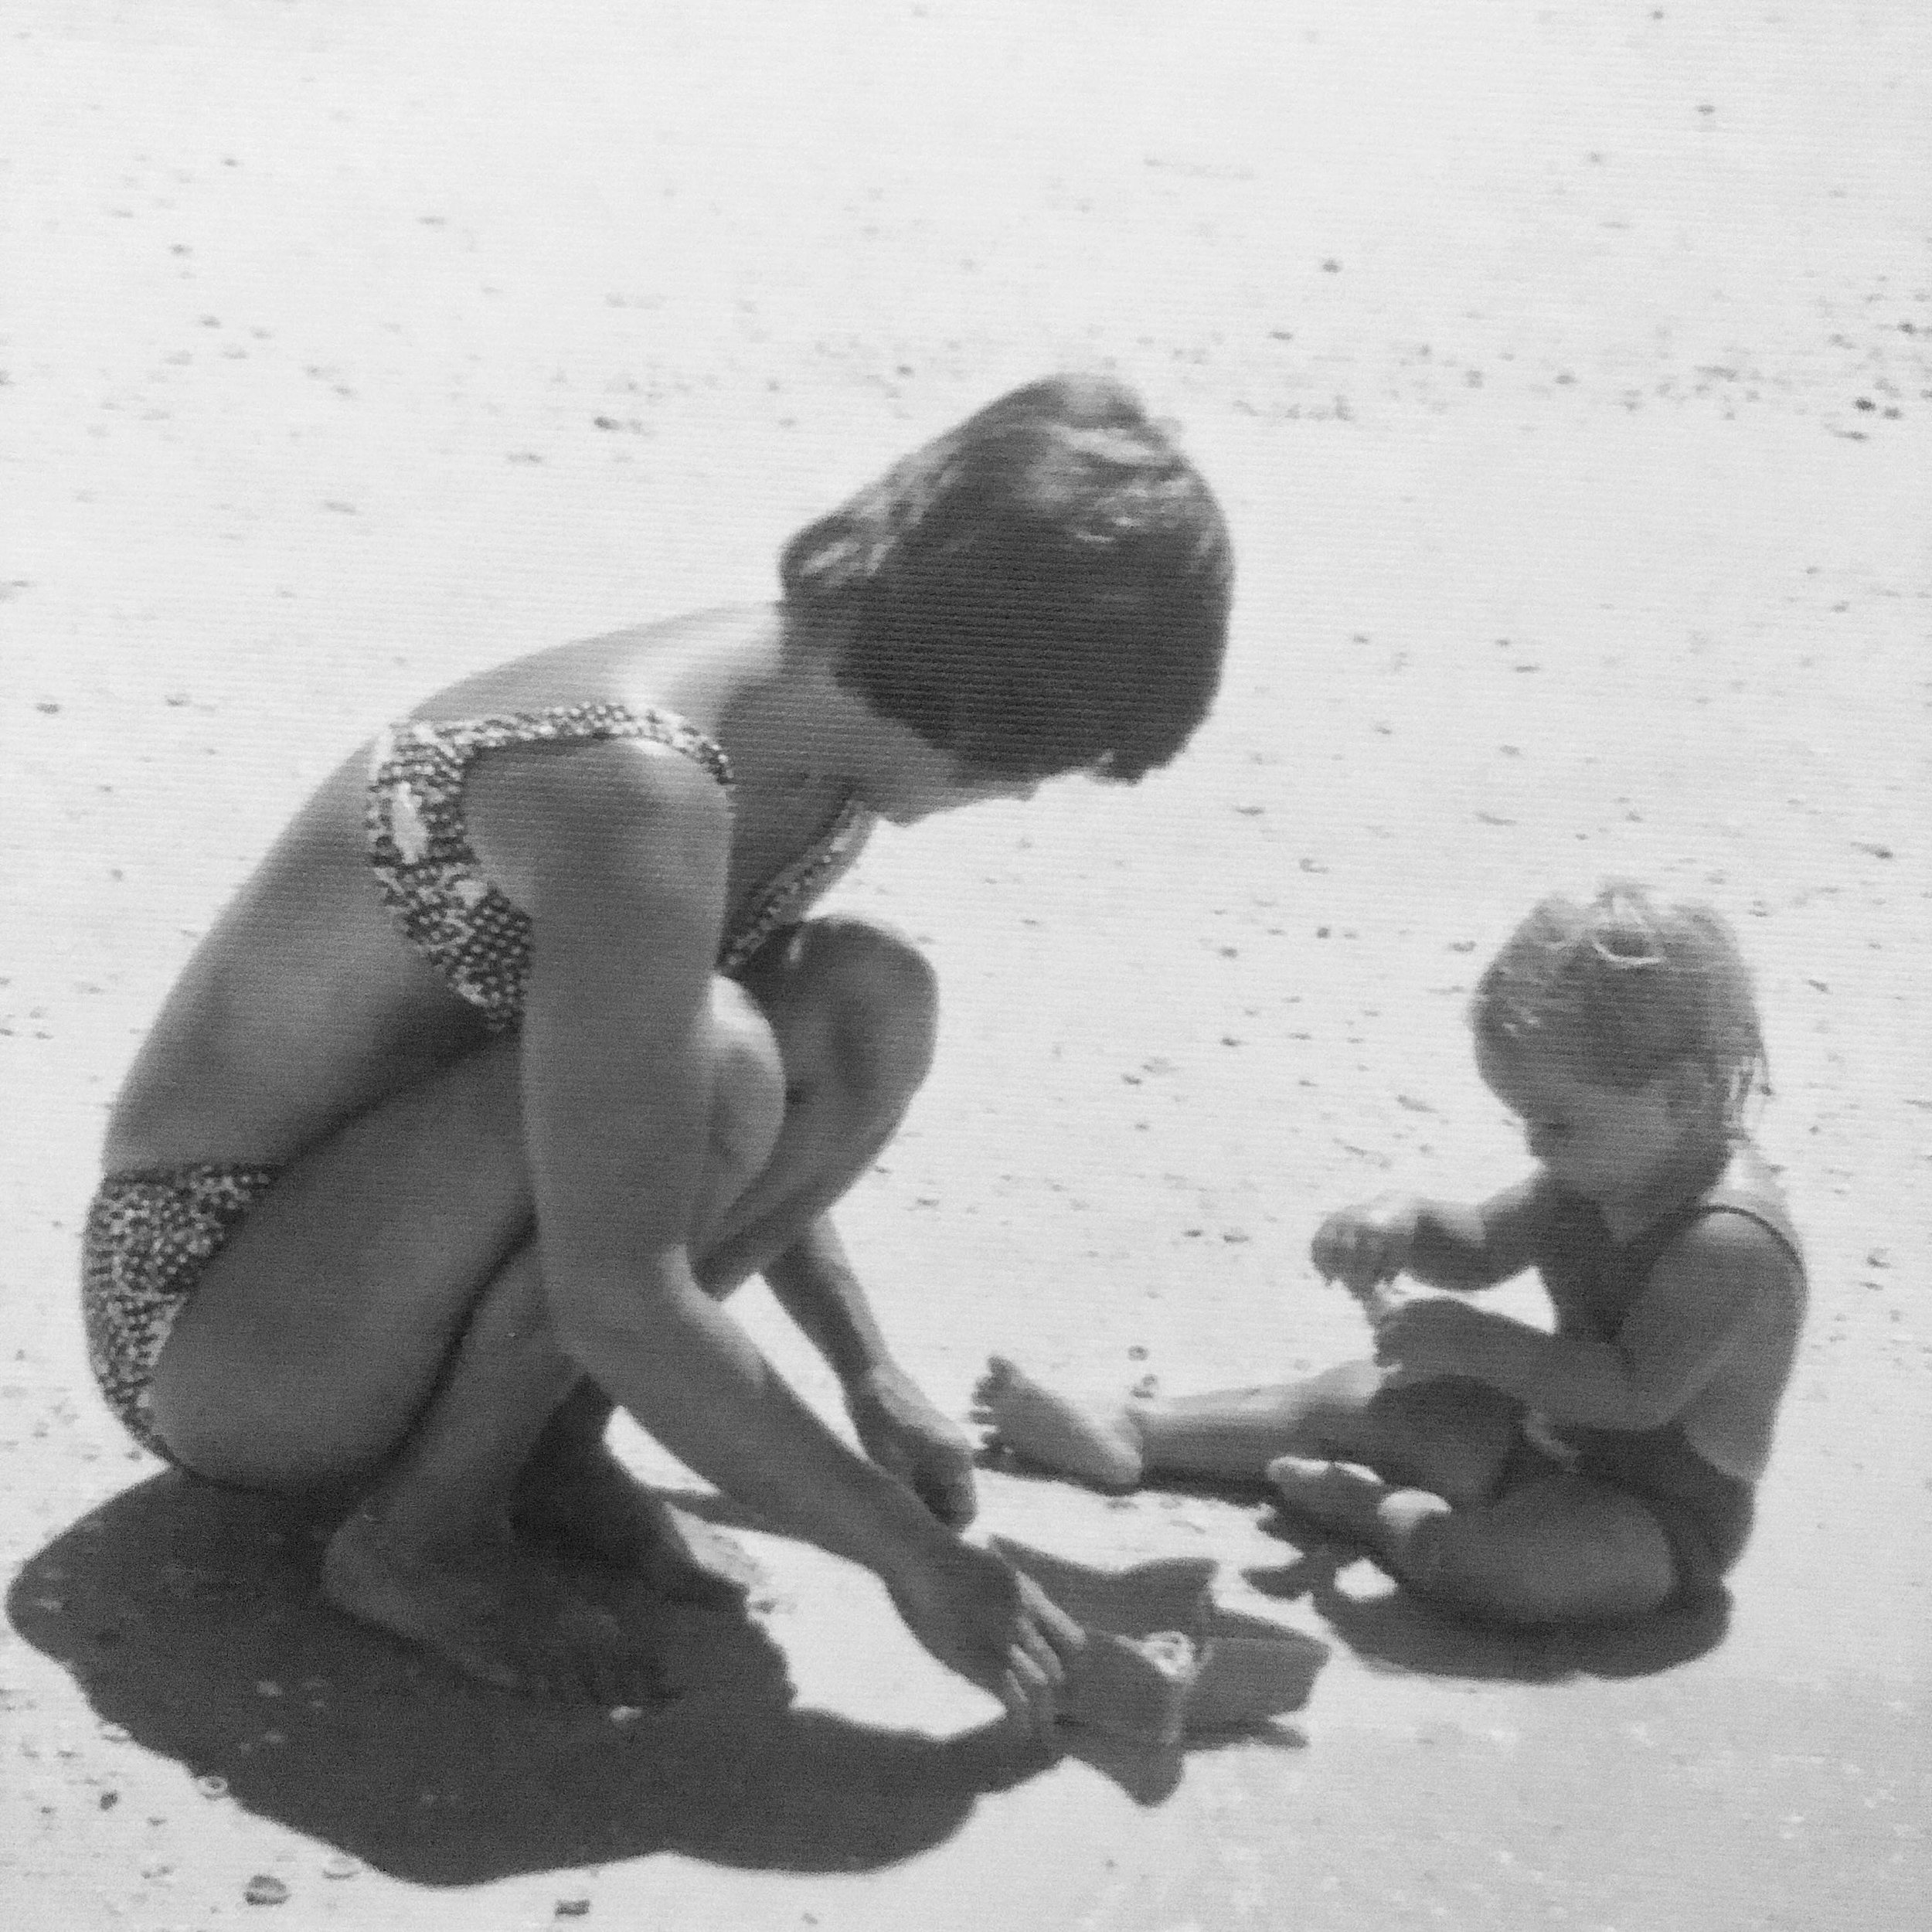 Thanks to my mom for, among many other things, sharing with me her love of the beach + ocean. It&rsquo;s where I have some of my most cherished memories. Happy Mother&rsquo;s Day mom! ❤️